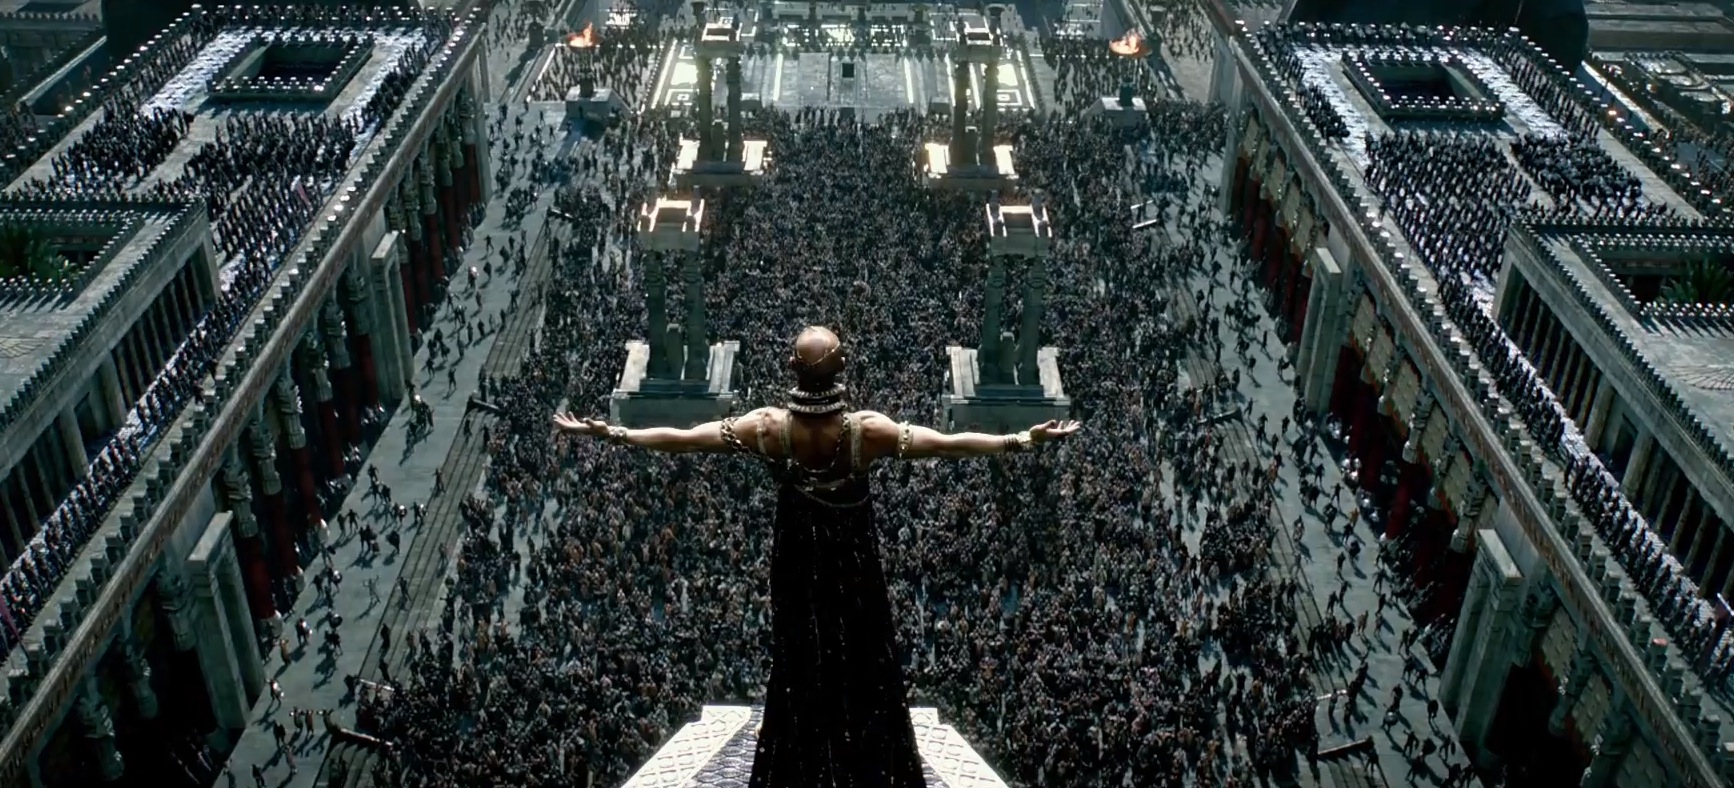 300 - Rise of an Empire9